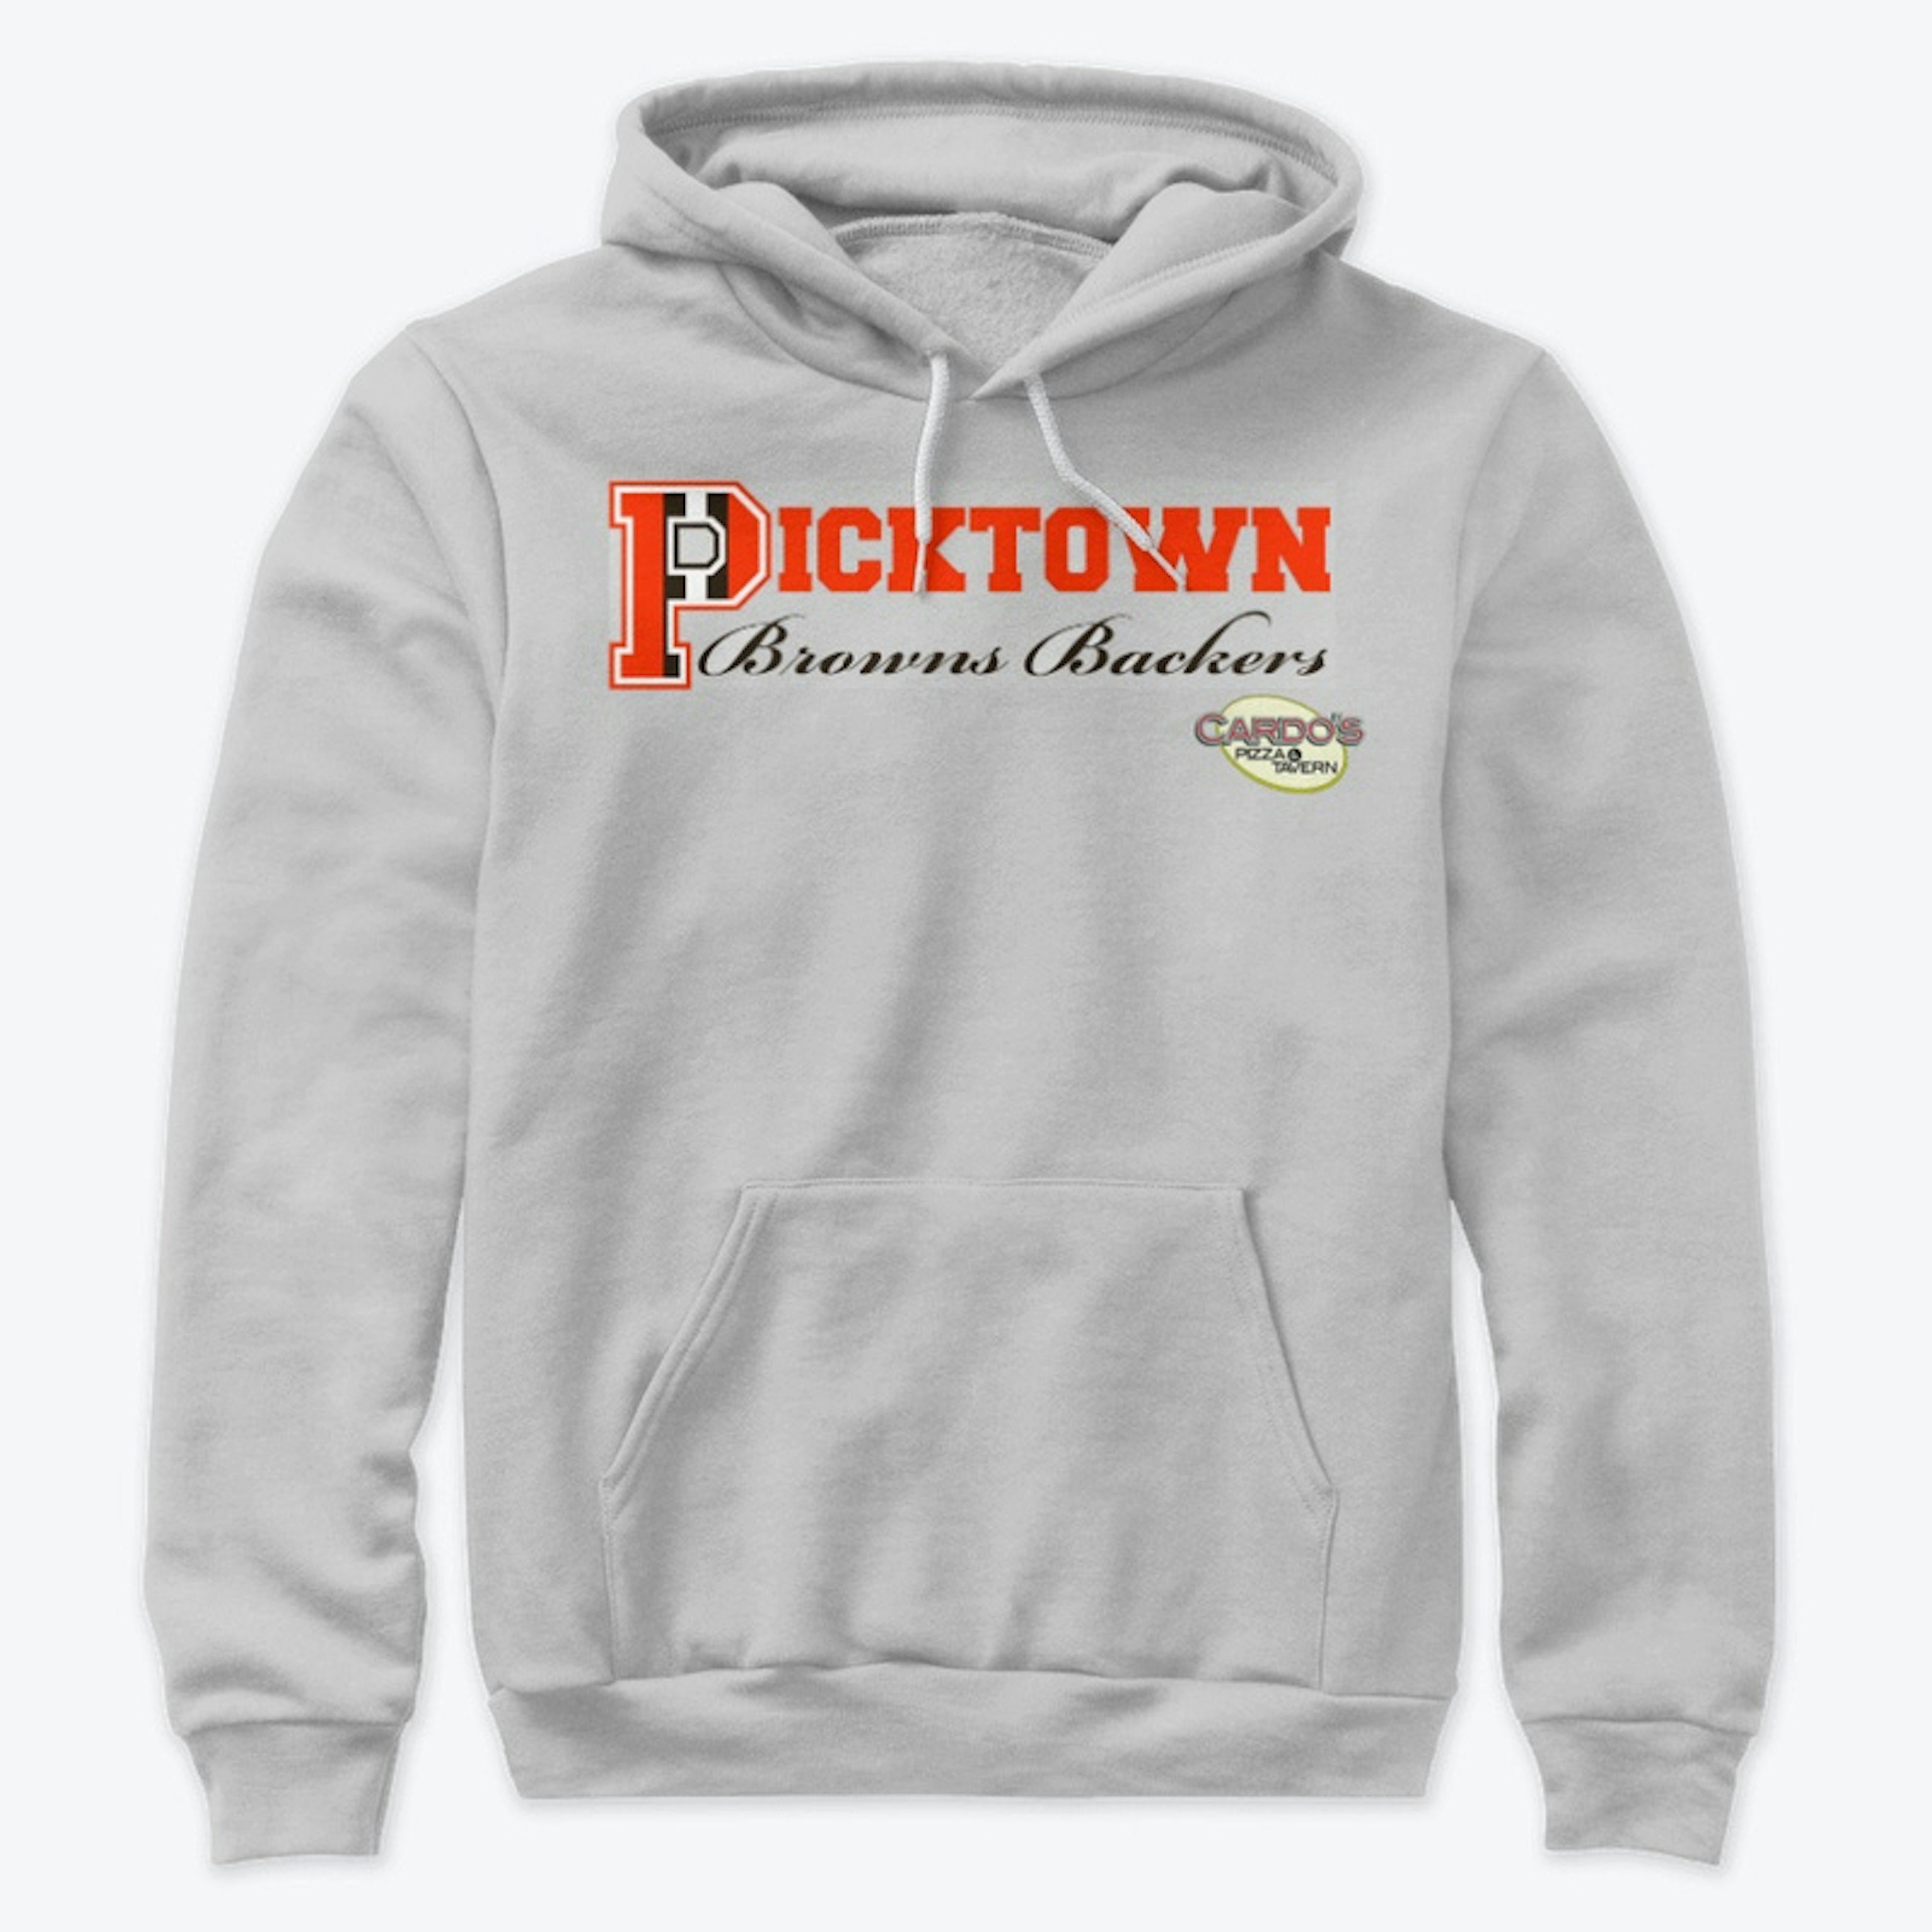 Picktown Browns Backers Official gear